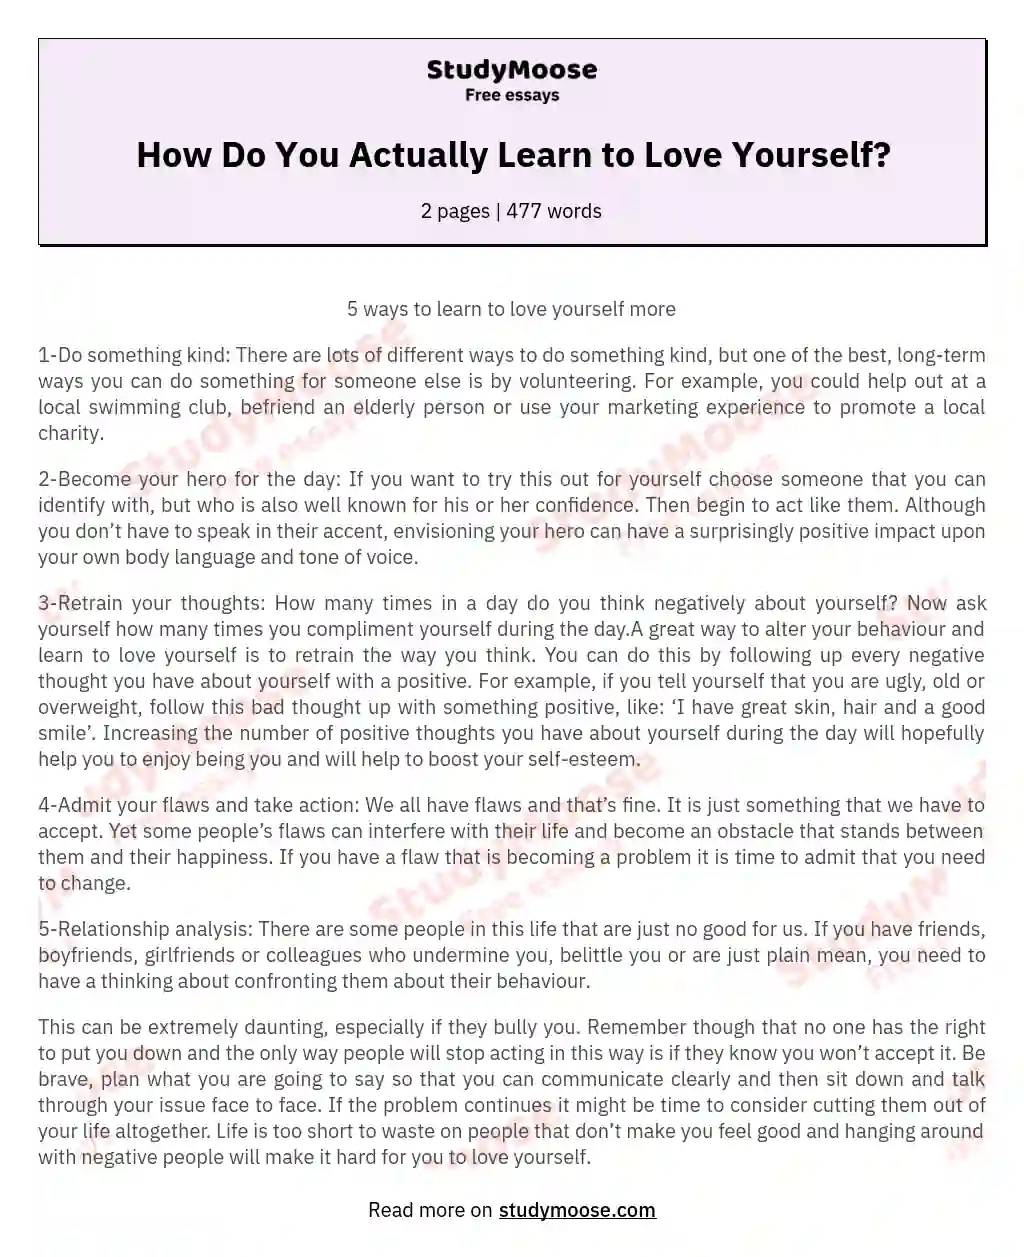 How Do You Actually Learn to Love Yourself? essay